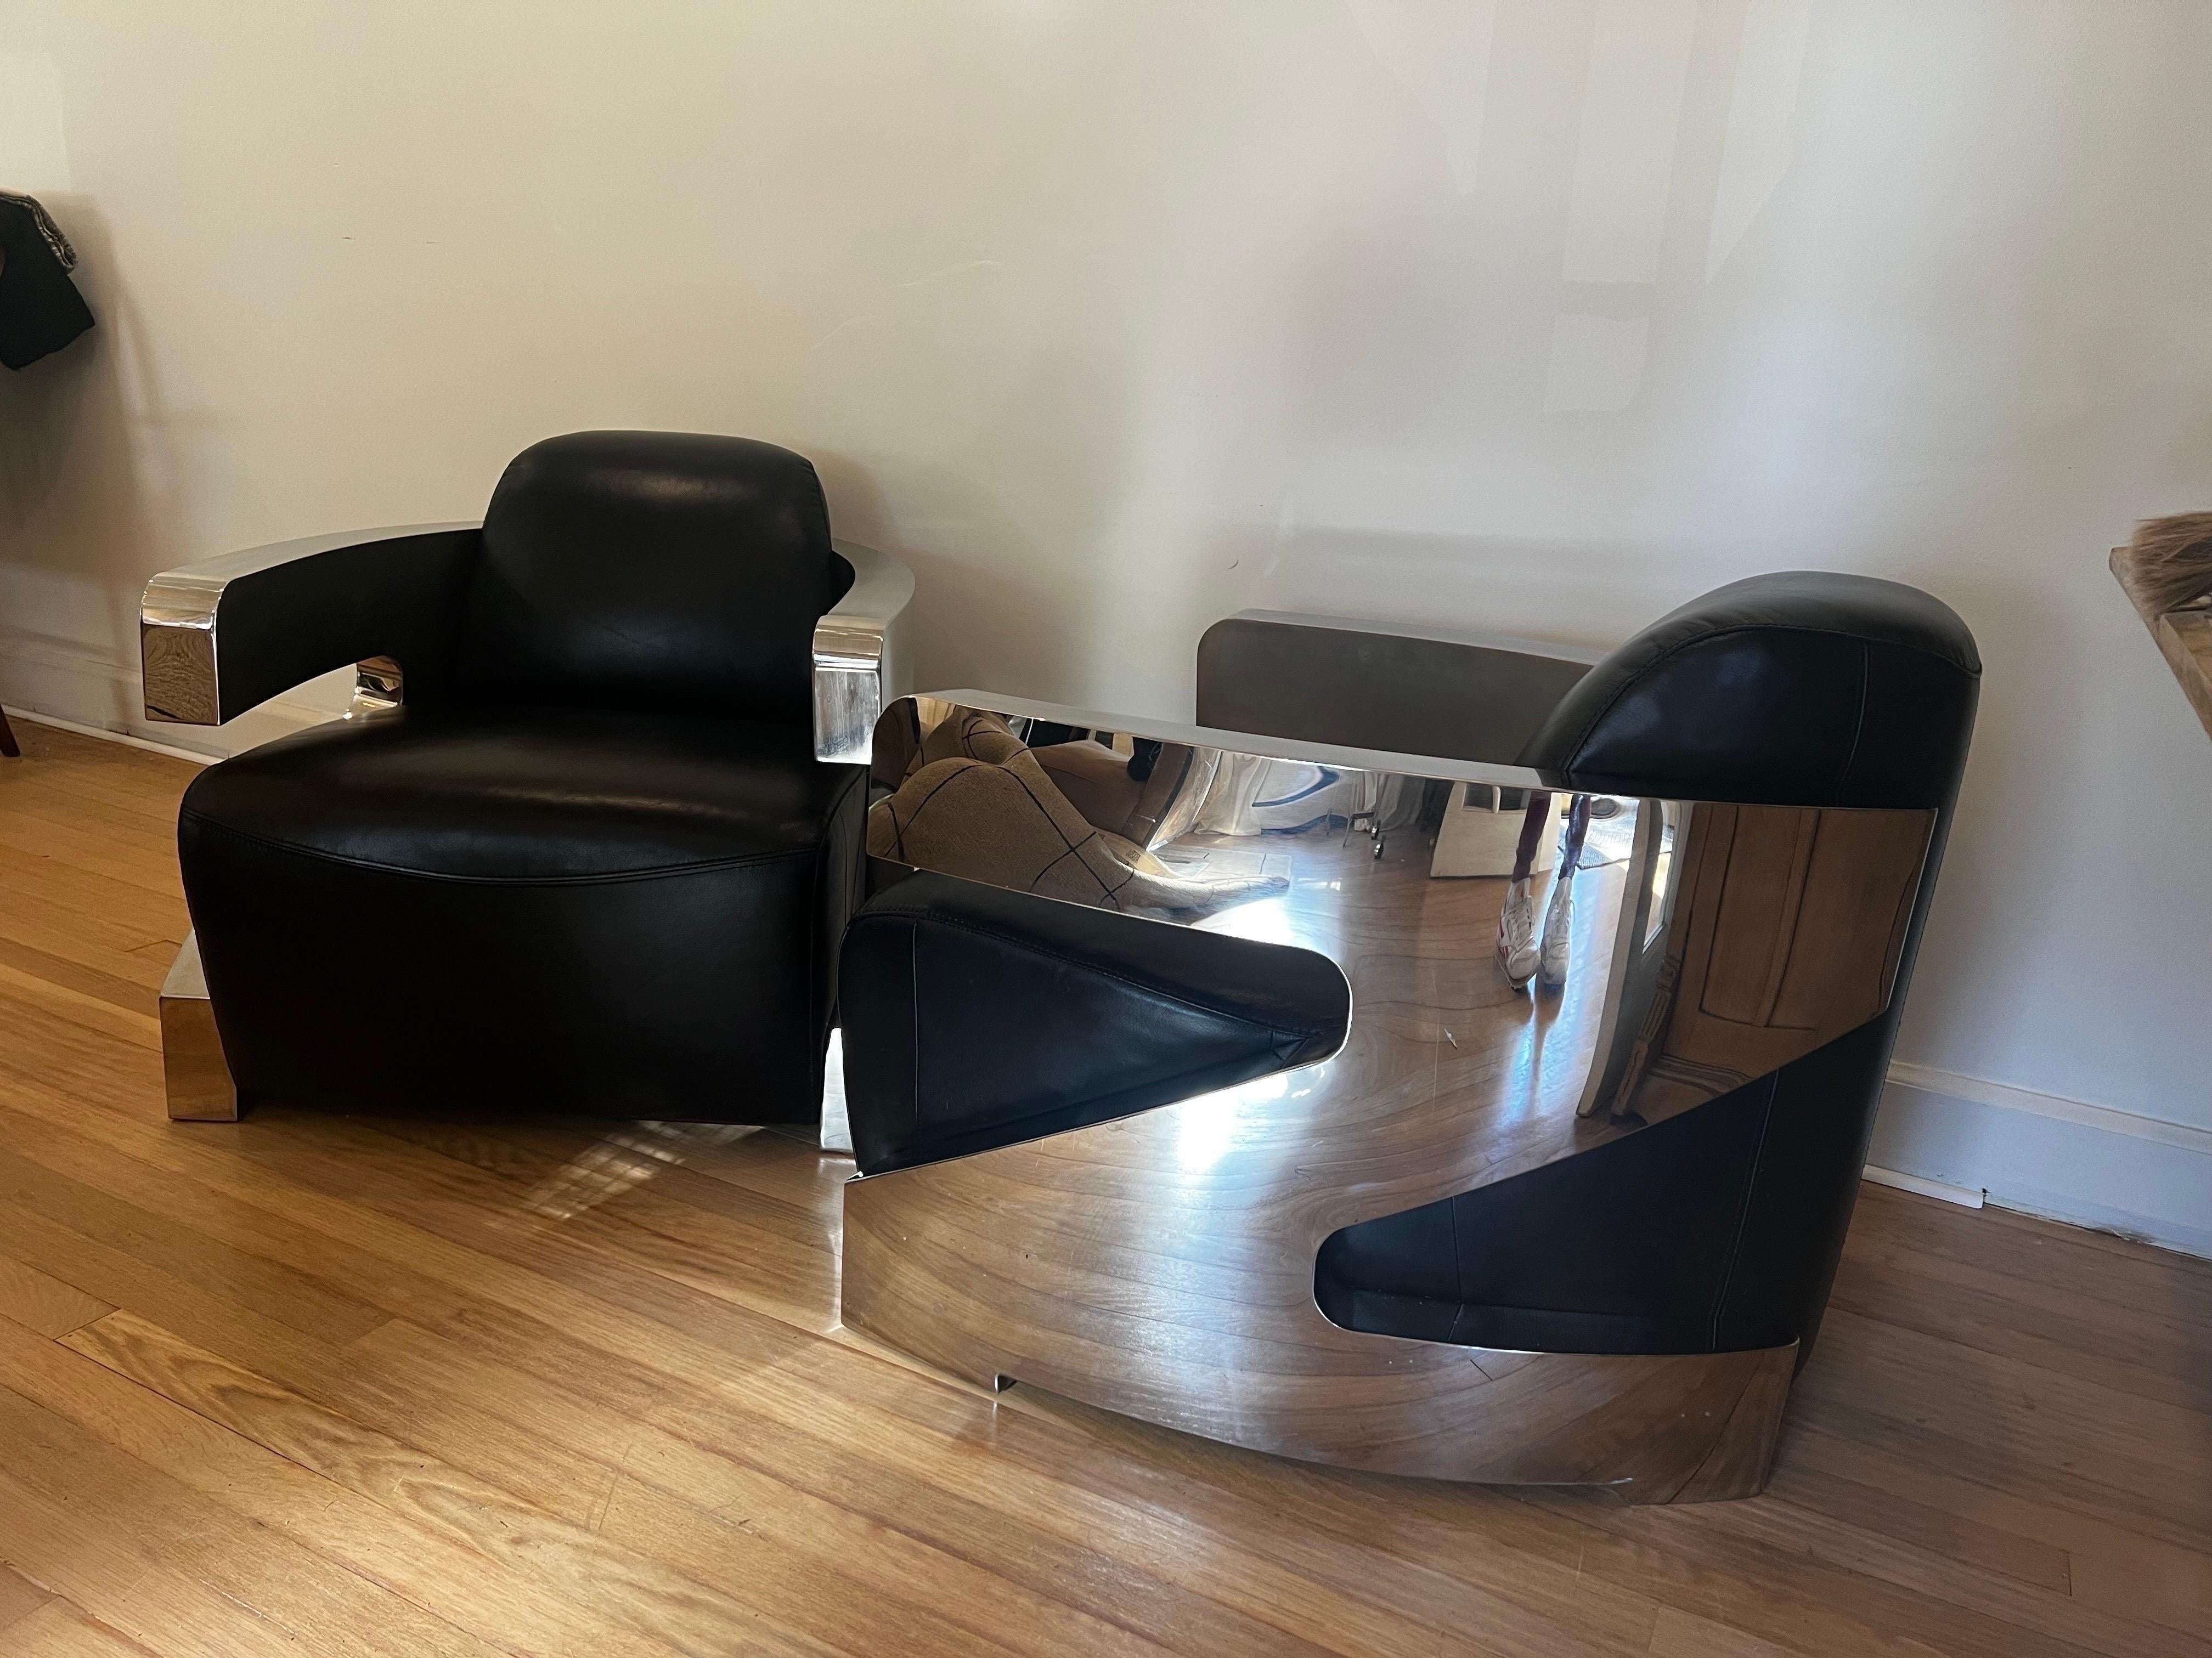 PAIR of Industrial Art Deco style round back lounge chairs with chrome frame and black leather upholstery.